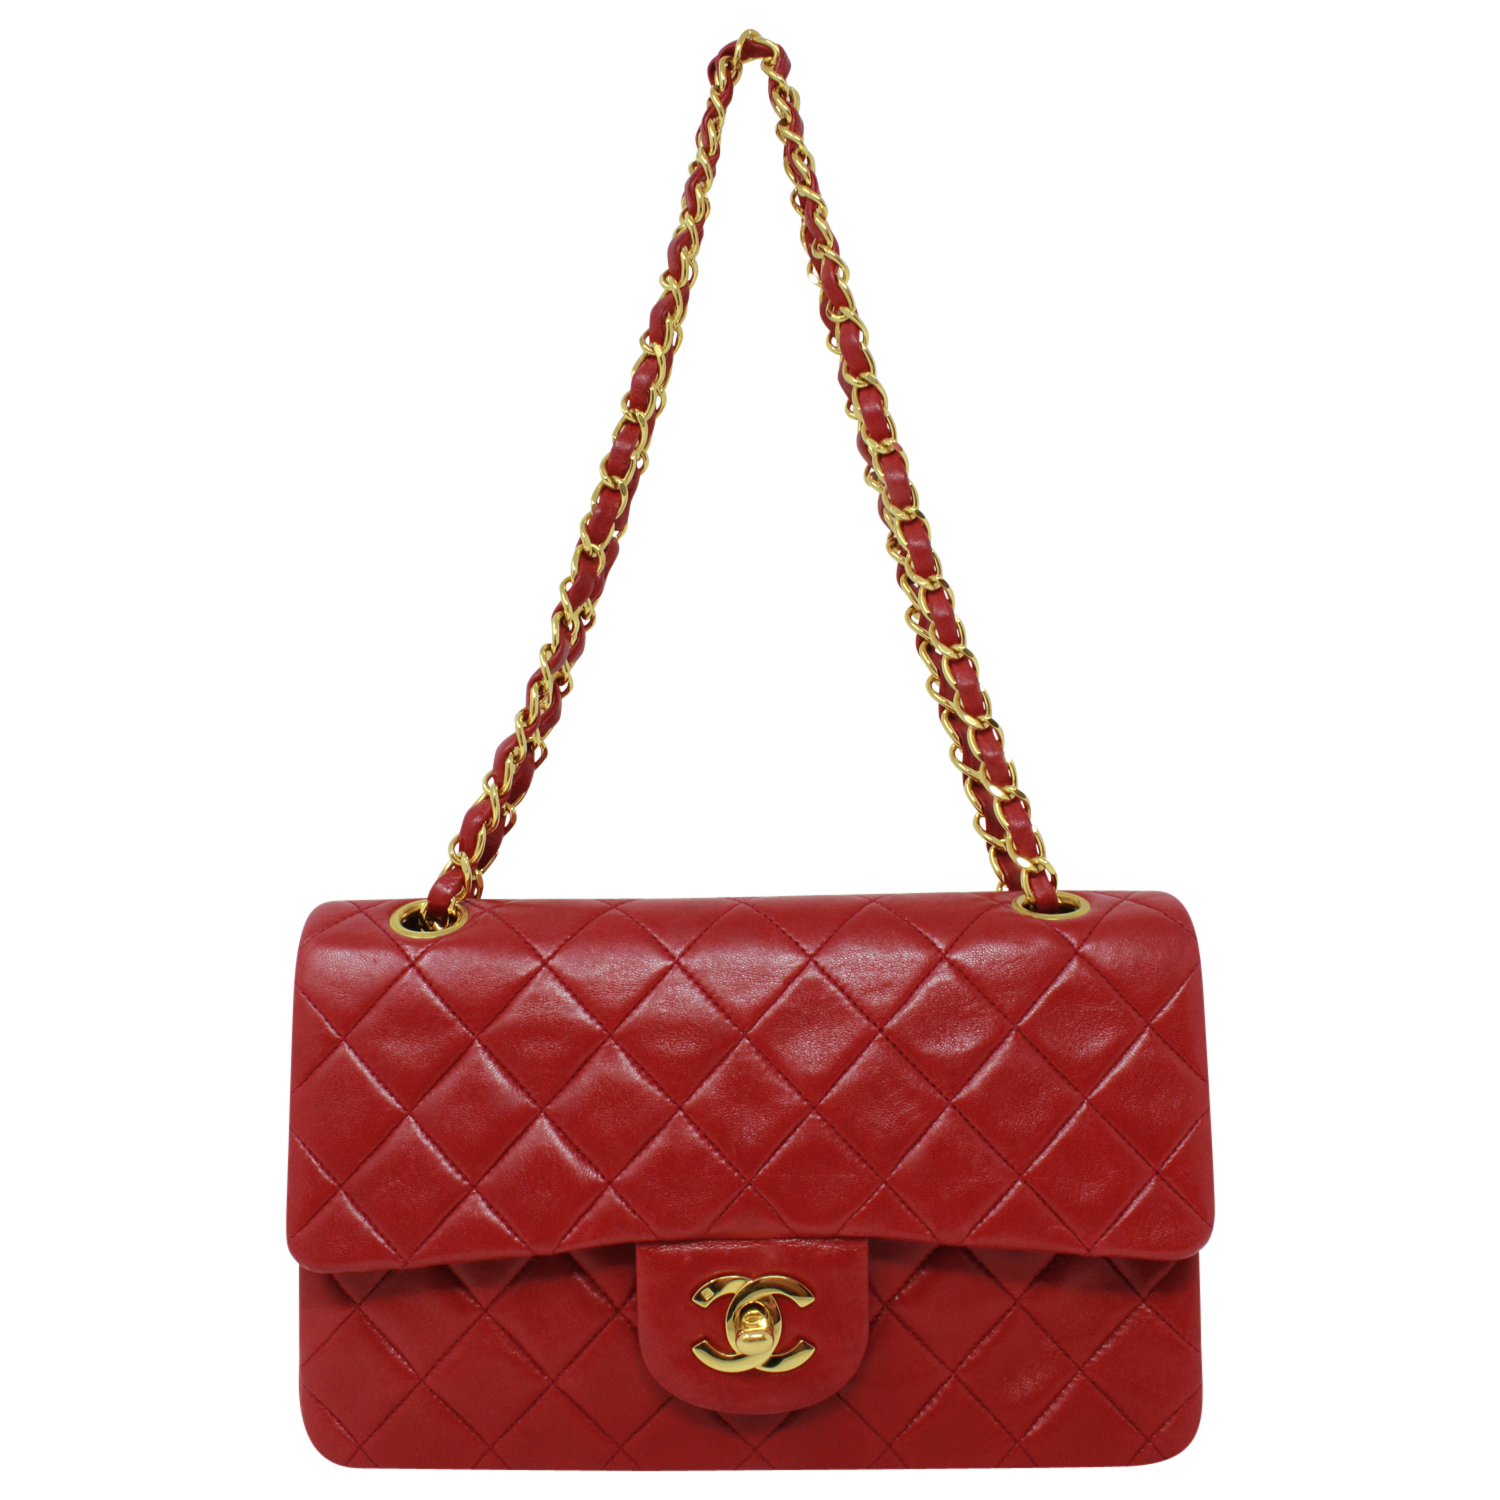 Chanel Small Red Double Flap Bag